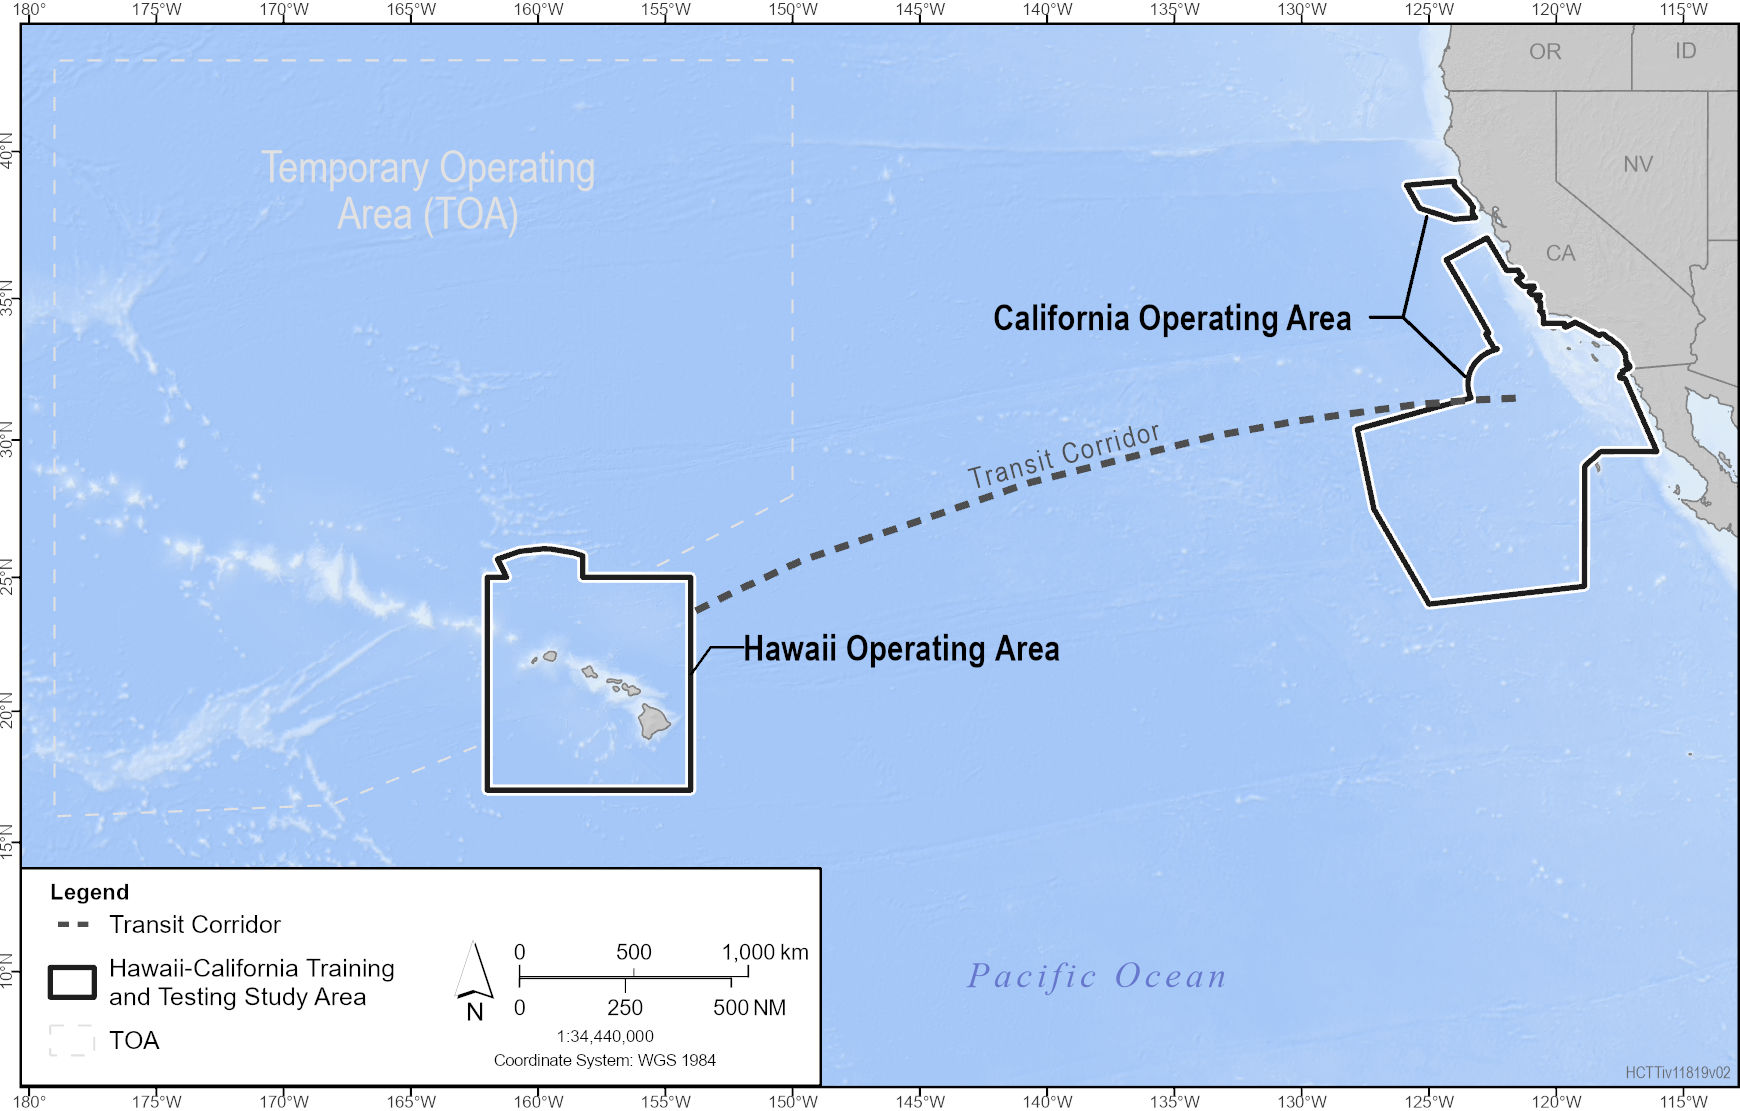 This is an image of a map providing an overview of the Hawaii-California Training and Testing Study Area. The map is showing the Hawaii Operating Area and Temporary Operating Area, the California Operating Area, and the transit corridor connecting the two.